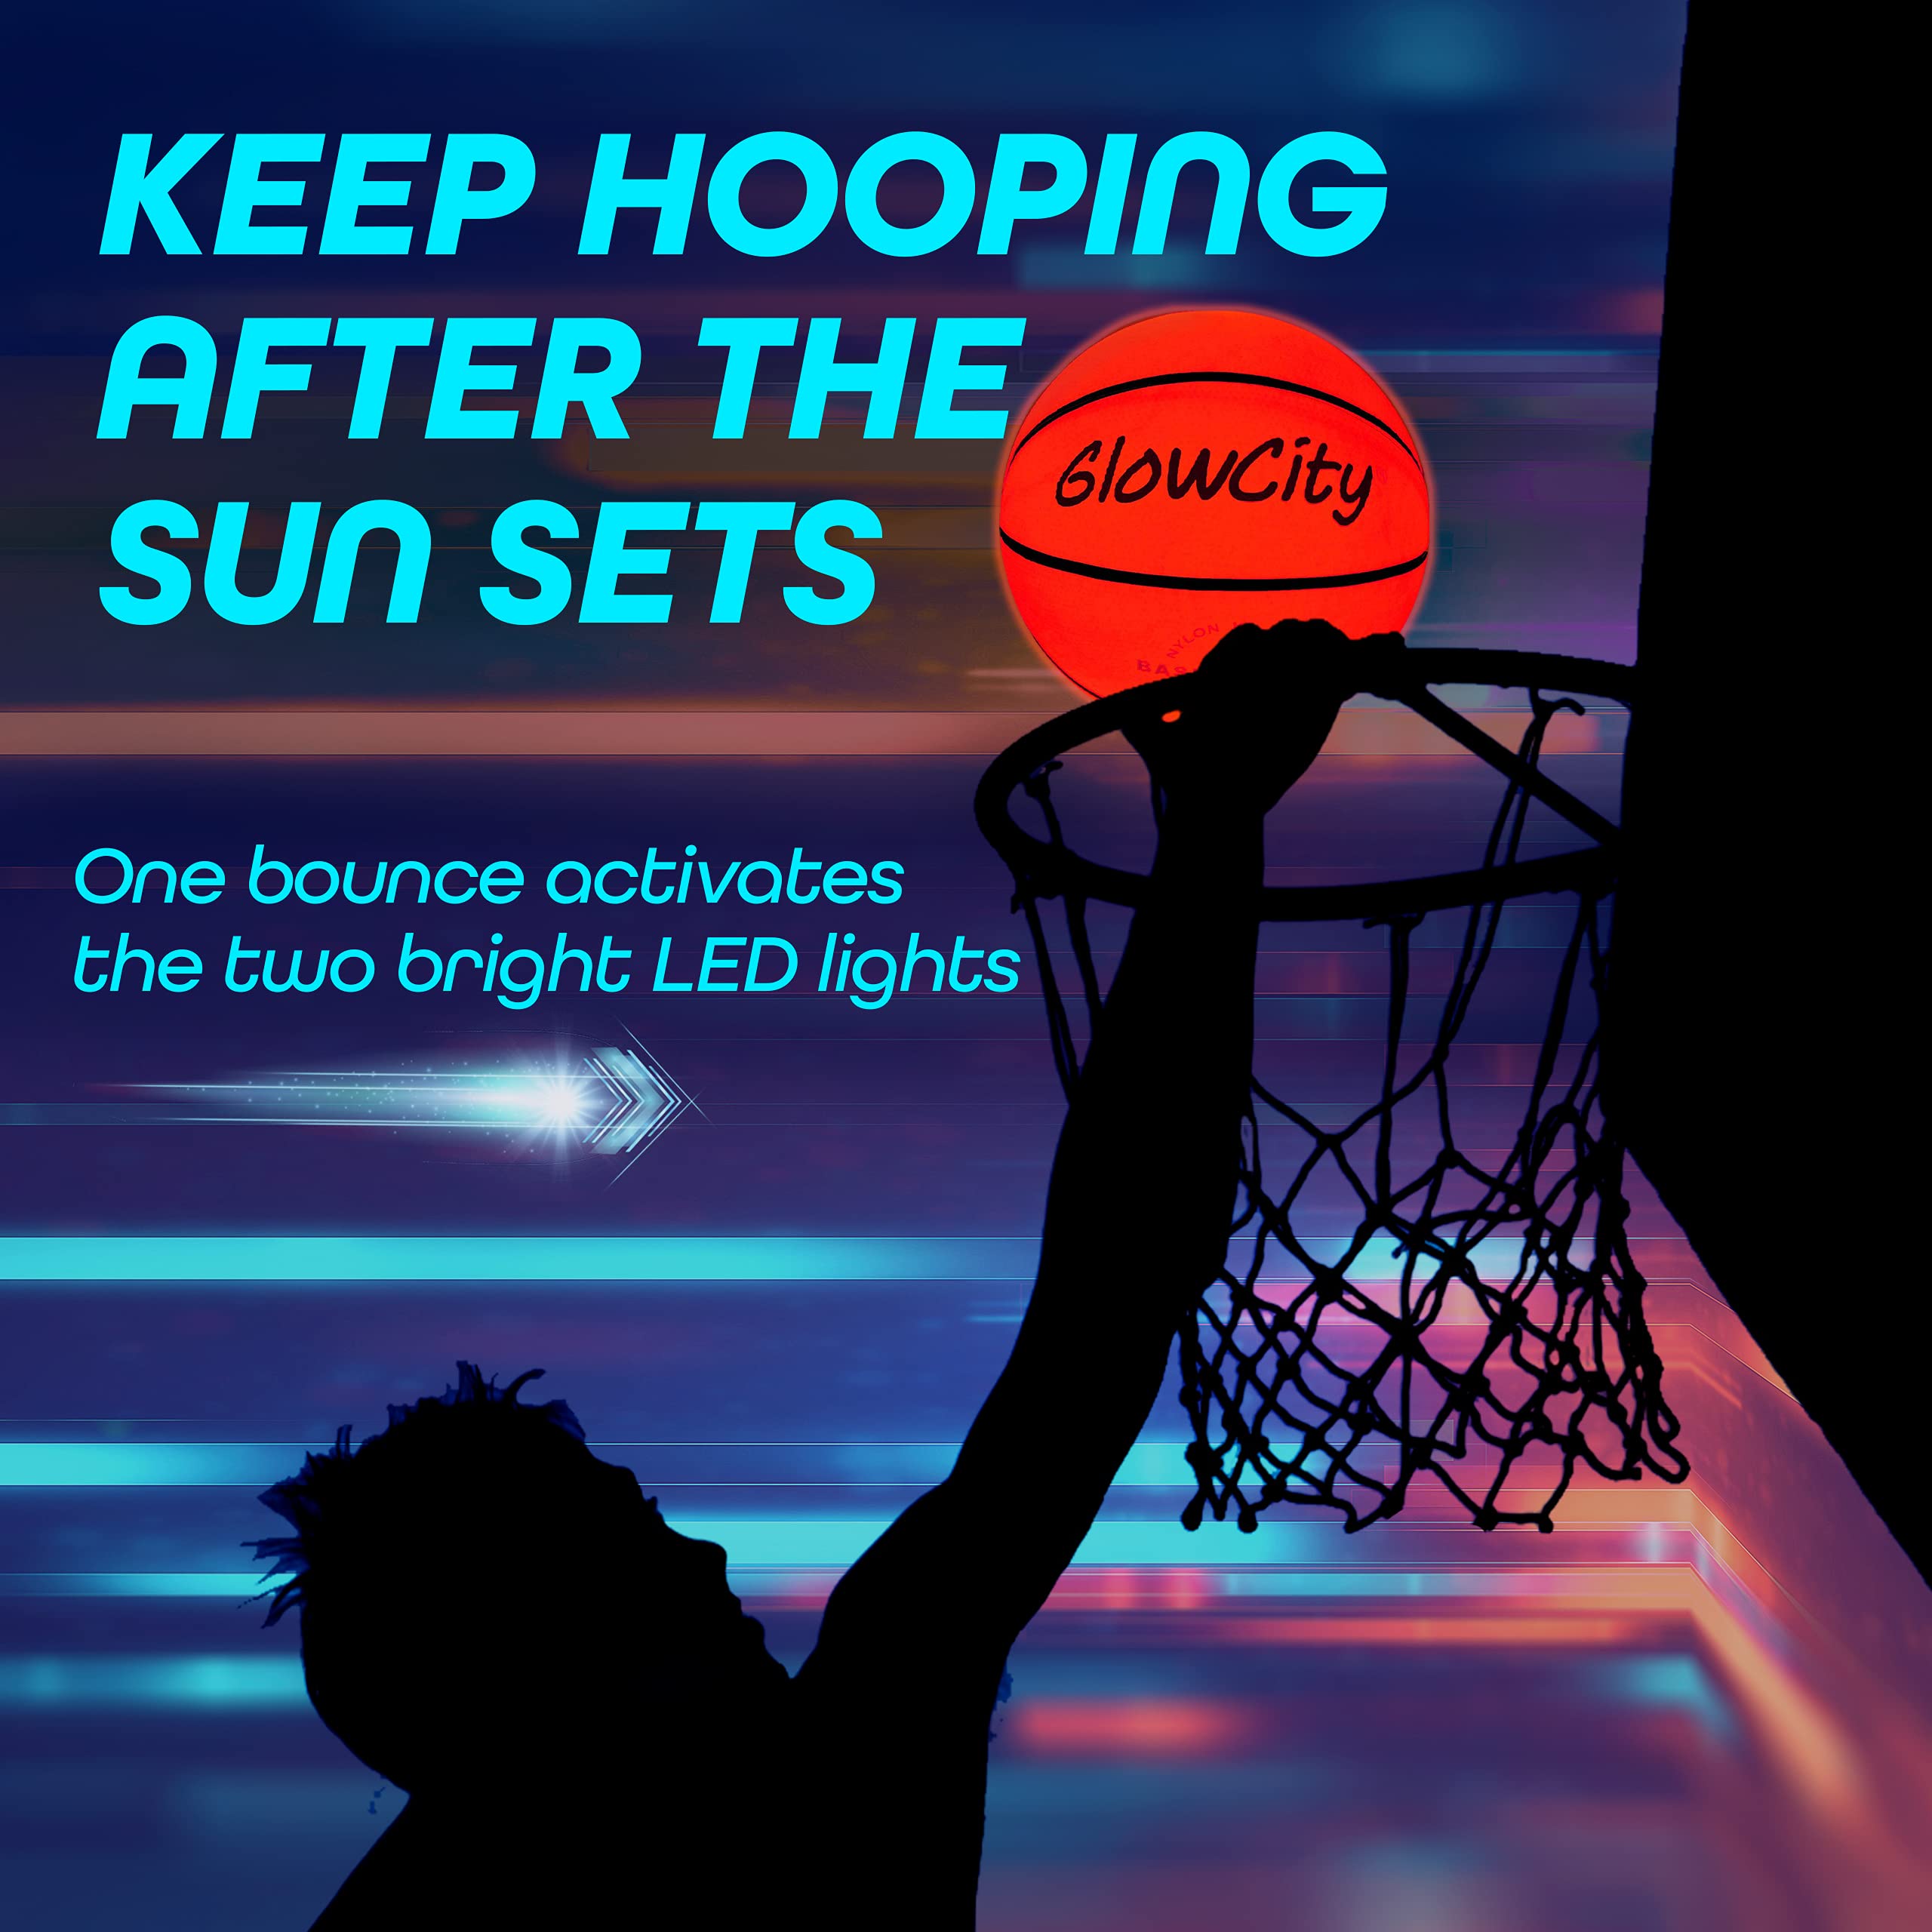 GlowCity Glow in The Dark Basketball for Teen Boy - Glowing Red Basket Ball, Light Up LED Toy for Night Ball Games - Sports Stuff & Gadgets for Kids Age 8 Years Old and Up